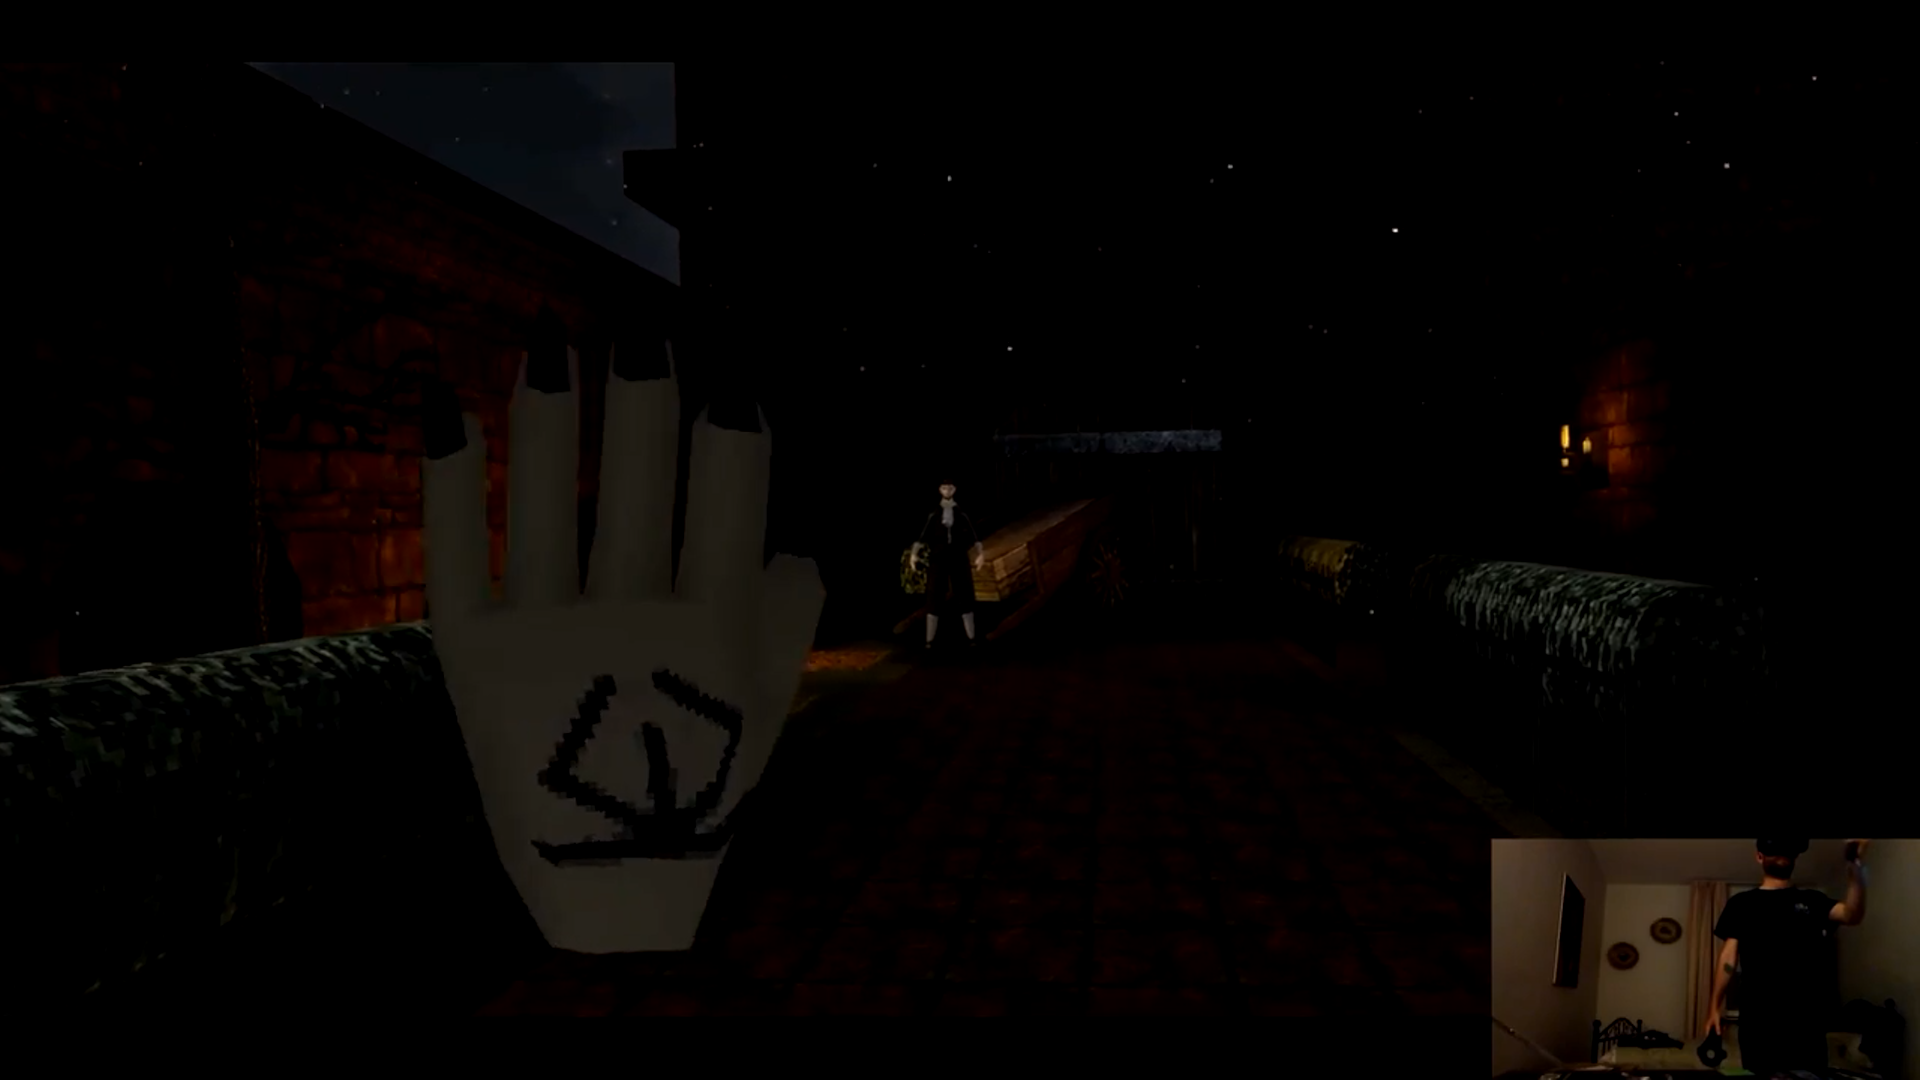 While VR may have made the game more interactive, letting the player wave to pilgrims.